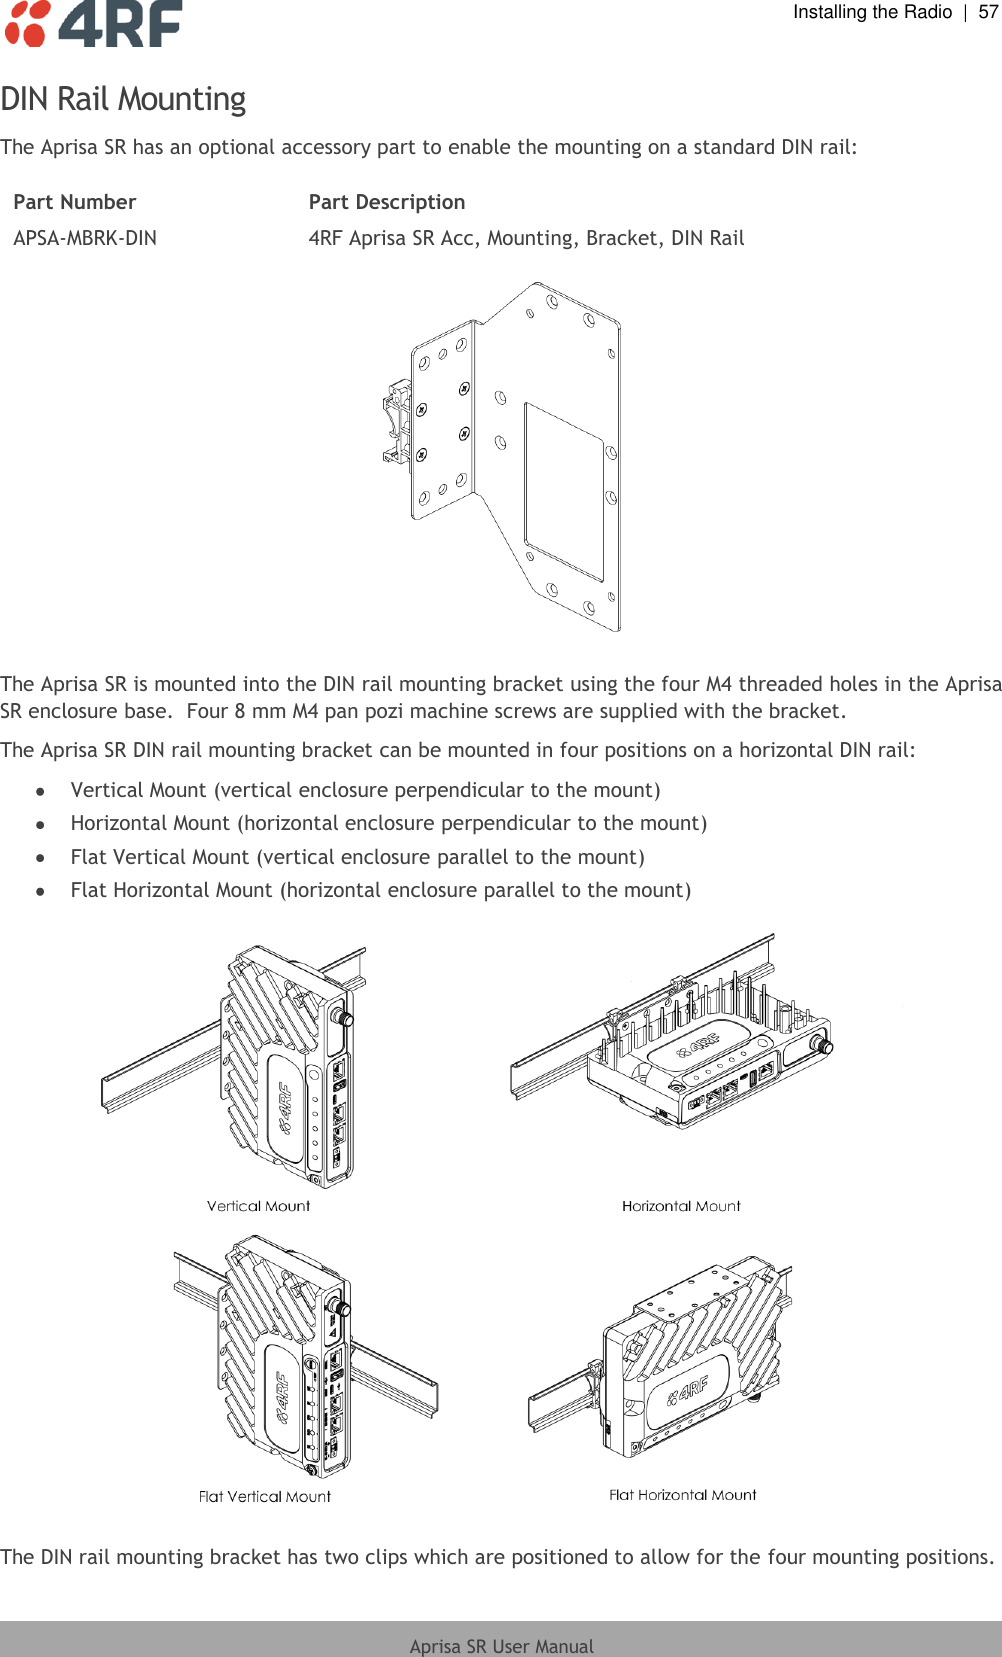  Installing the Radio  |  57  Aprisa SR User Manual  DIN Rail Mounting The Aprisa SR has an optional accessory part to enable the mounting on a standard DIN rail:  Part Number Part Description APSA-MBRK-DIN 4RF Aprisa SR Acc, Mounting, Bracket, DIN Rail    The Aprisa SR is mounted into the DIN rail mounting bracket using the four M4 threaded holes in the Aprisa SR enclosure base.  Four 8 mm M4 pan pozi machine screws are supplied with the bracket. The Aprisa SR DIN rail mounting bracket can be mounted in four positions on a horizontal DIN rail:  Vertical Mount (vertical enclosure perpendicular to the mount)  Horizontal Mount (horizontal enclosure perpendicular to the mount)  Flat Vertical Mount (vertical enclosure parallel to the mount)  Flat Horizontal Mount (horizontal enclosure parallel to the mount)    The DIN rail mounting bracket has two clips which are positioned to allow for the four mounting positions. 